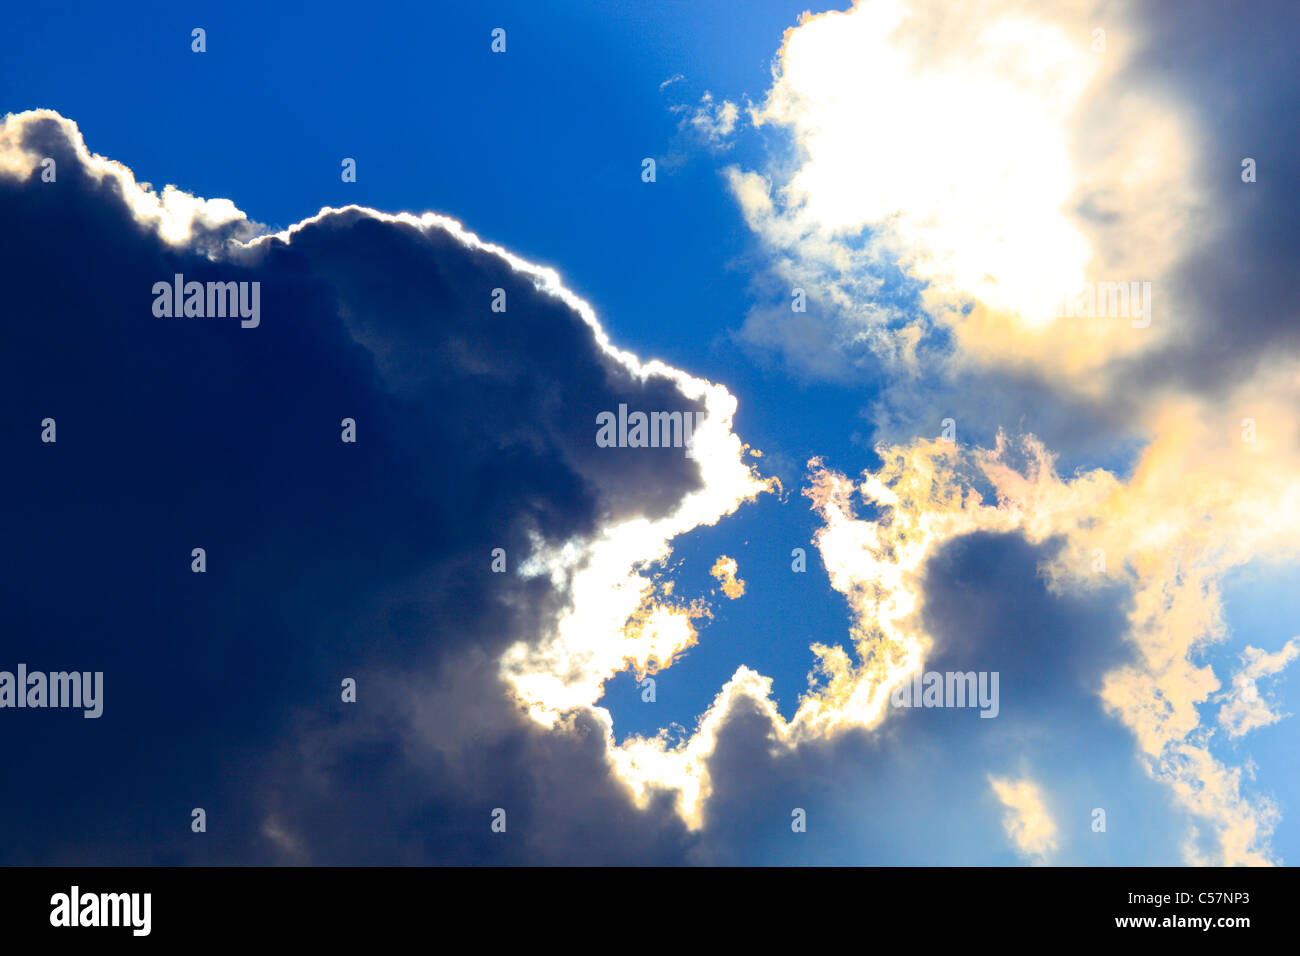 Thunderstorm, sky, pattern, sample, rain, sun, sunrays, mood, cloud, clouds, abstract, blue, blue sky, graphical, gray, atmosphe Stock Photo